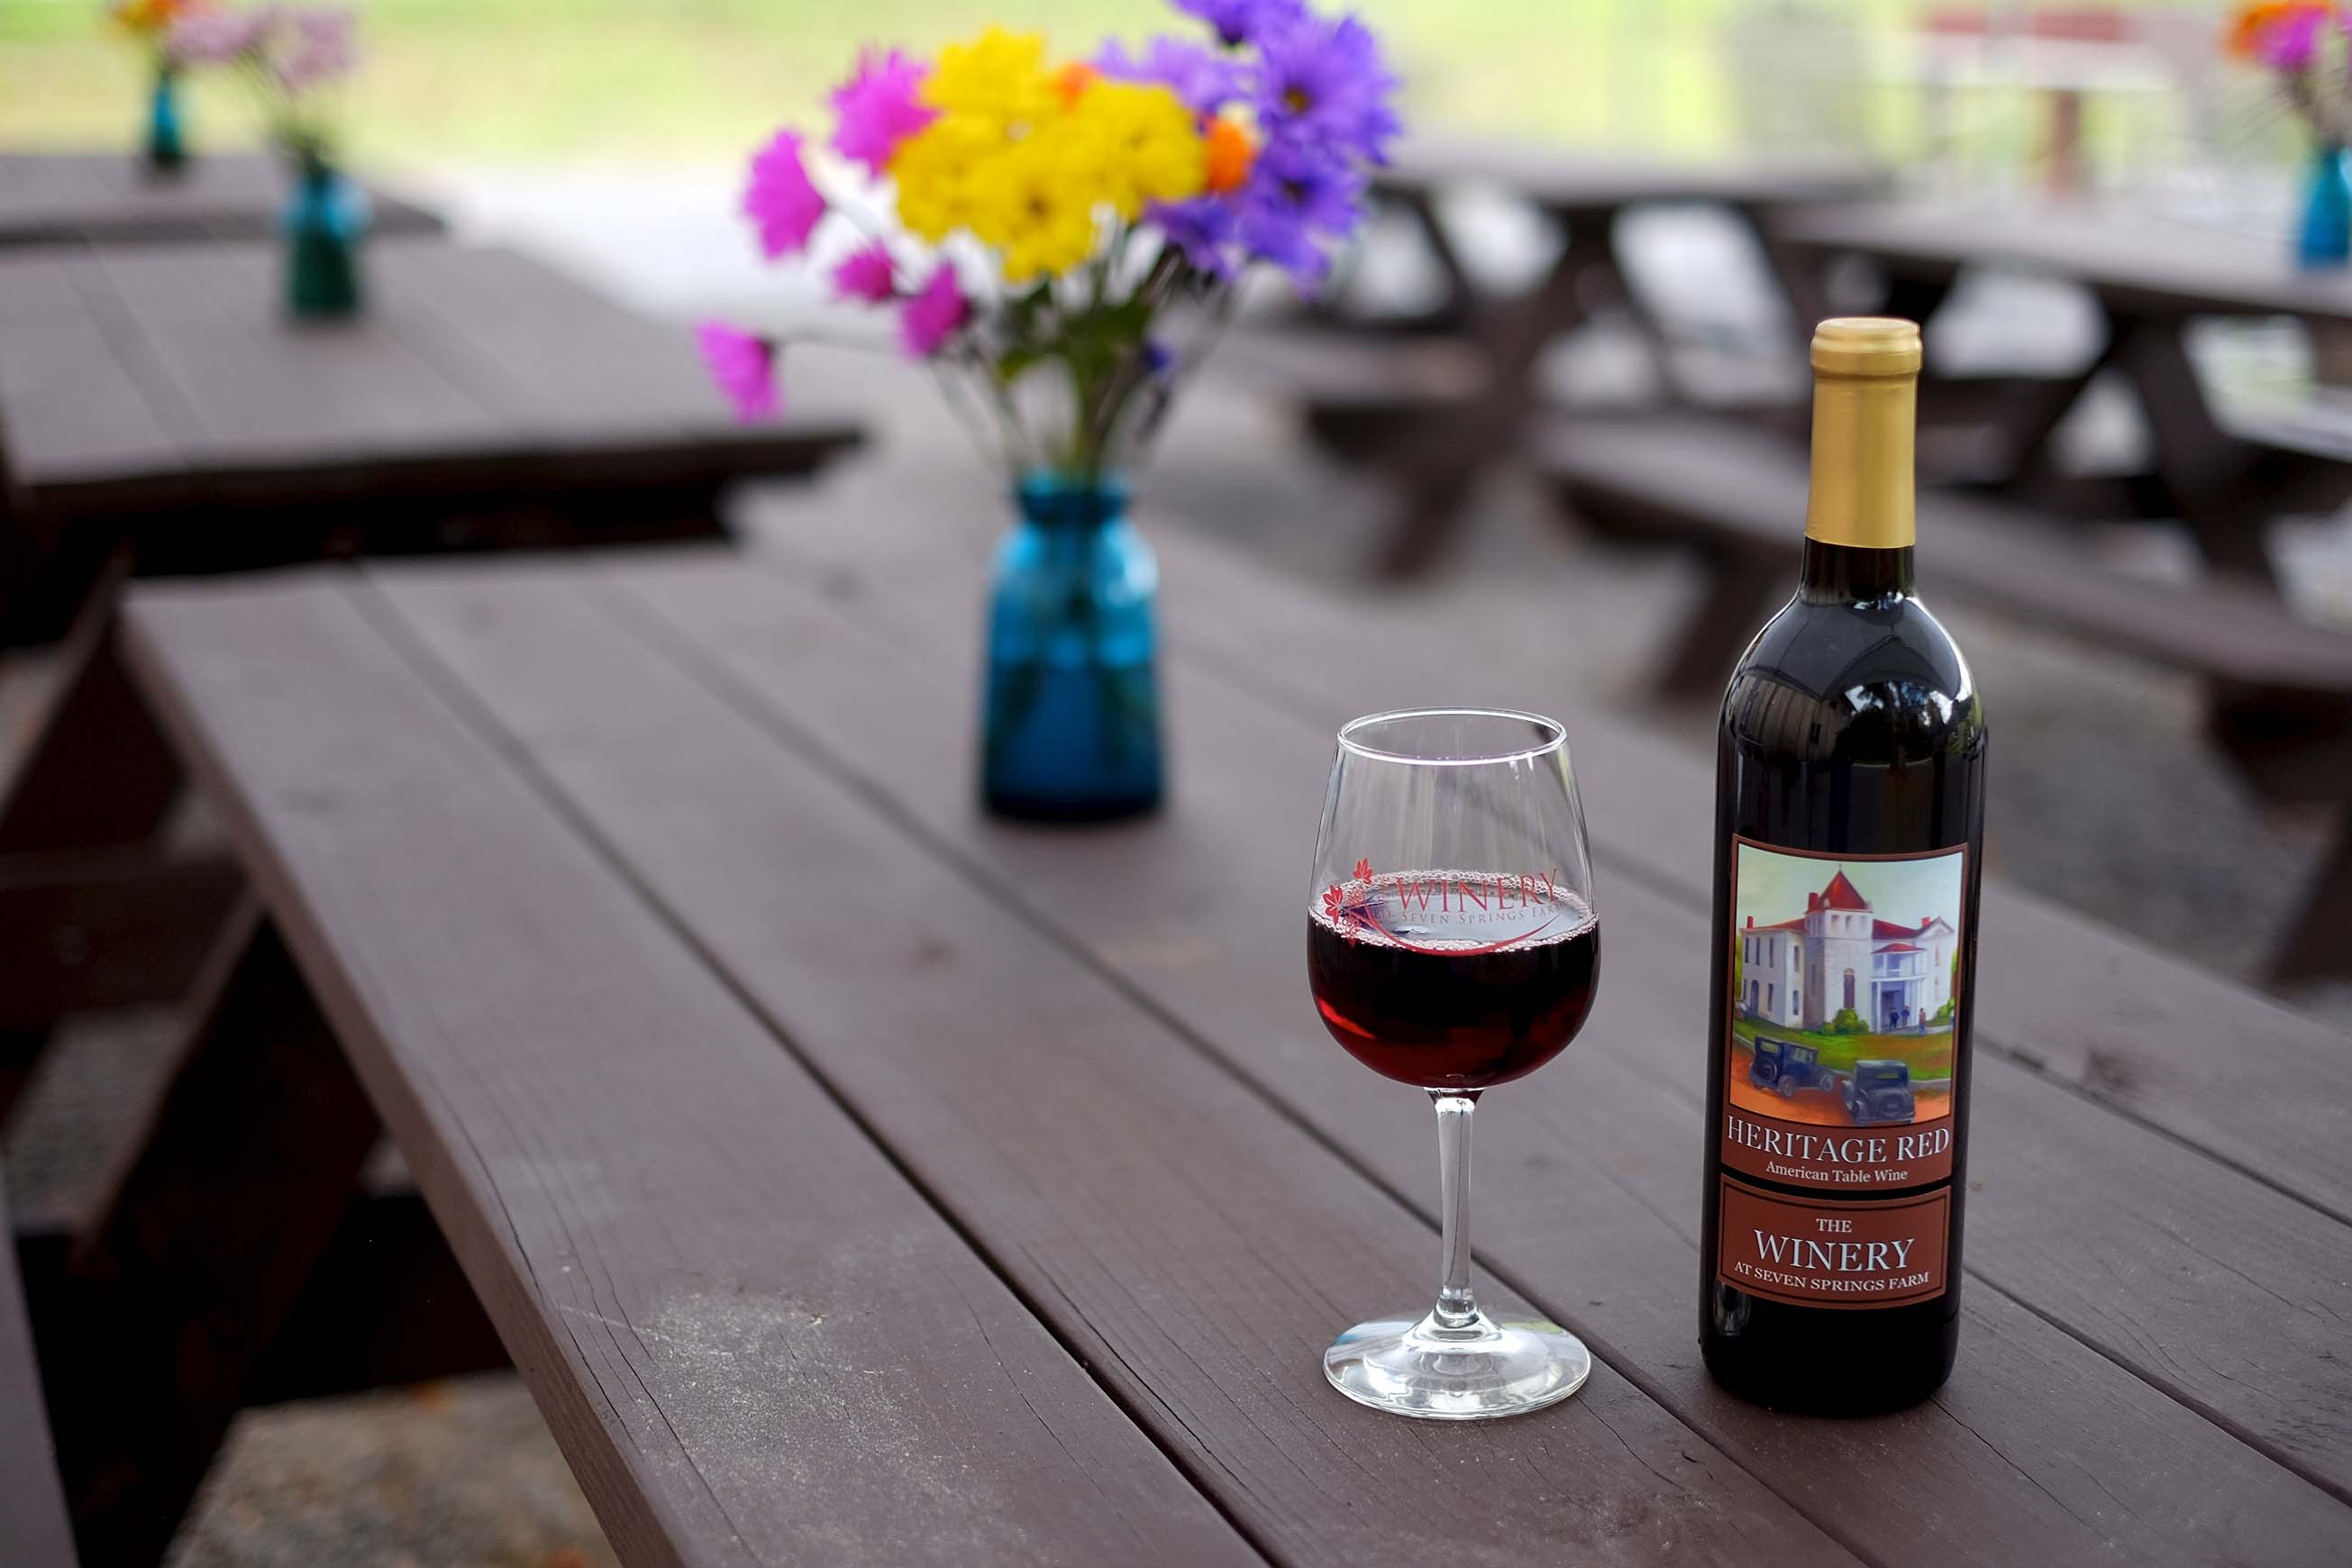 Many Tennessee wineries offer picnic areas in a beautiful, country setting.